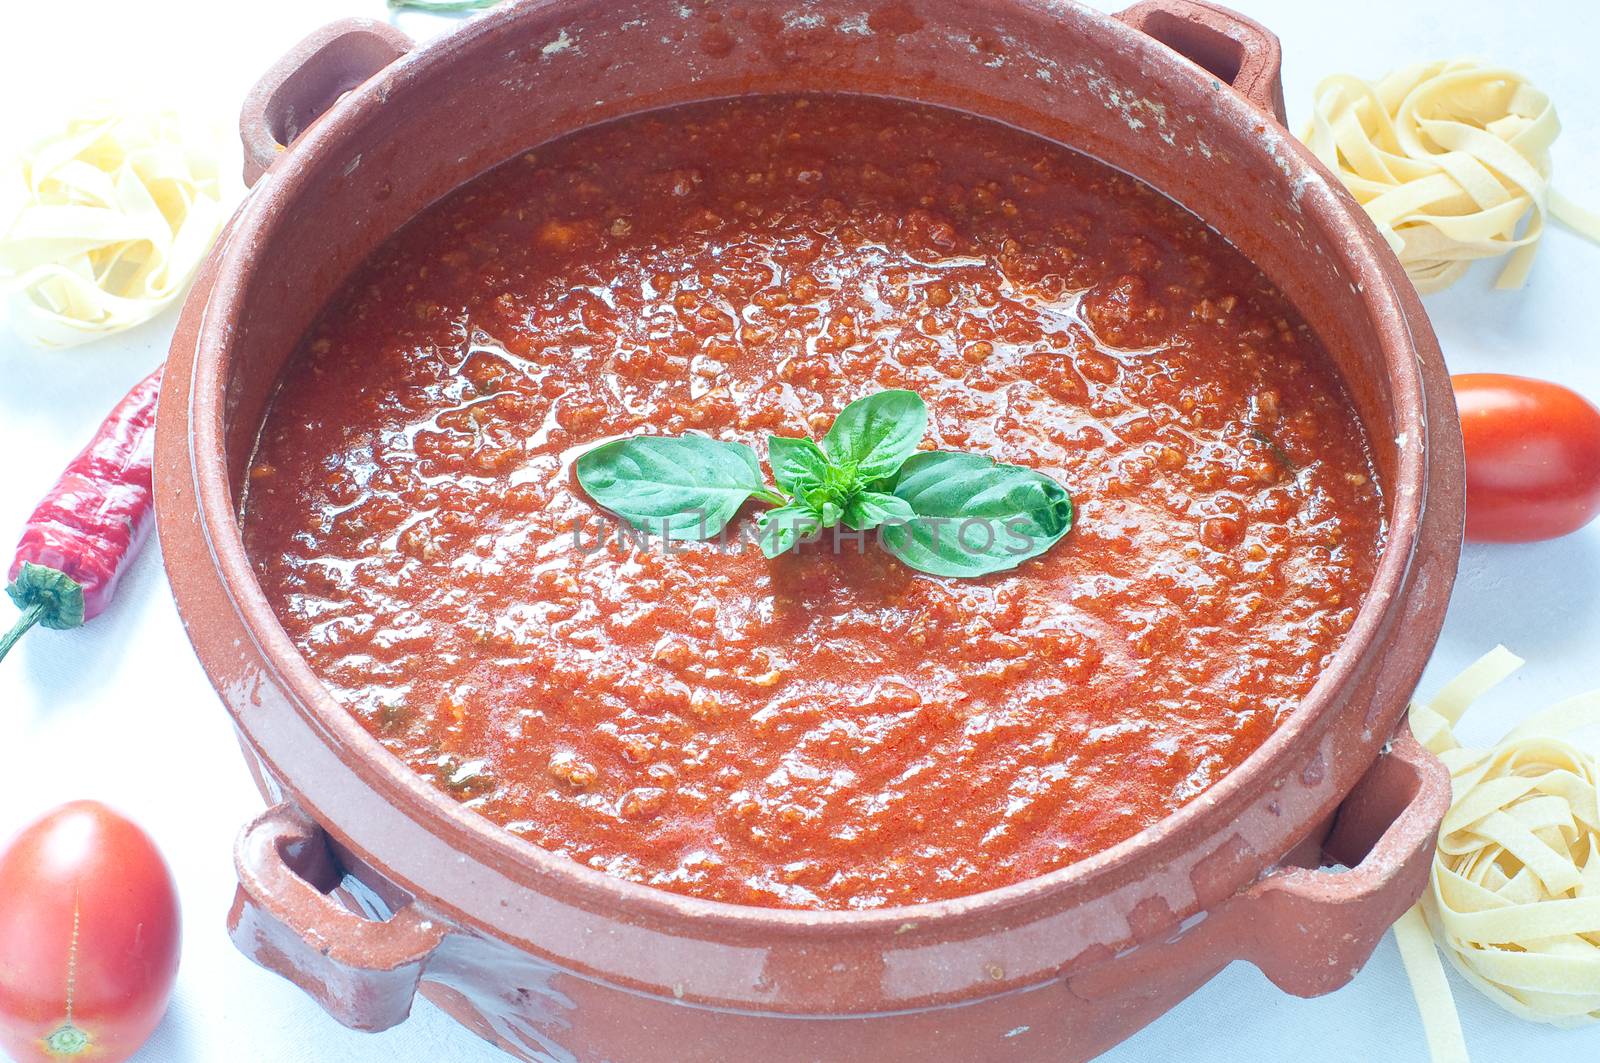 Tomato sauce in a clay pot by gringox